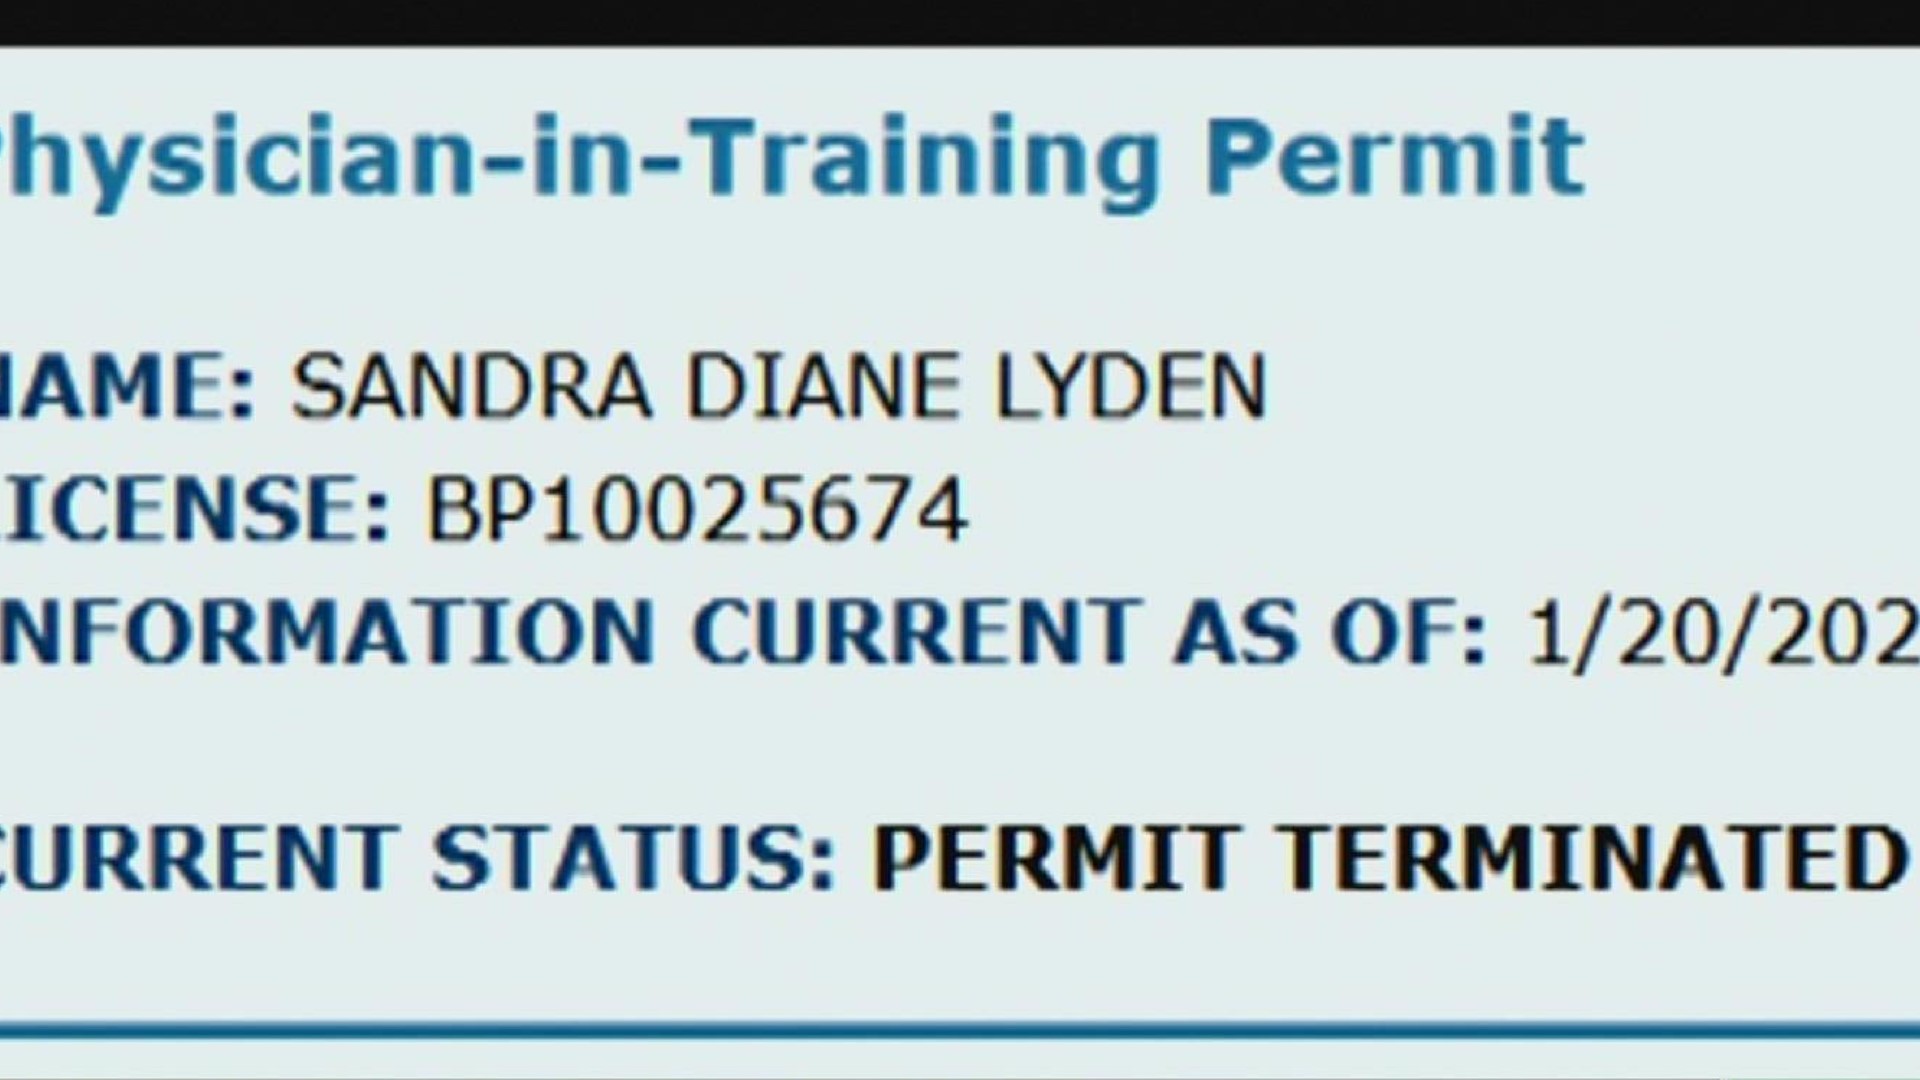 Dr. Sandra Lyden was fired from her position at the Medical Examiner's office last Friday -- the same day investigators seized 33 files from her office.